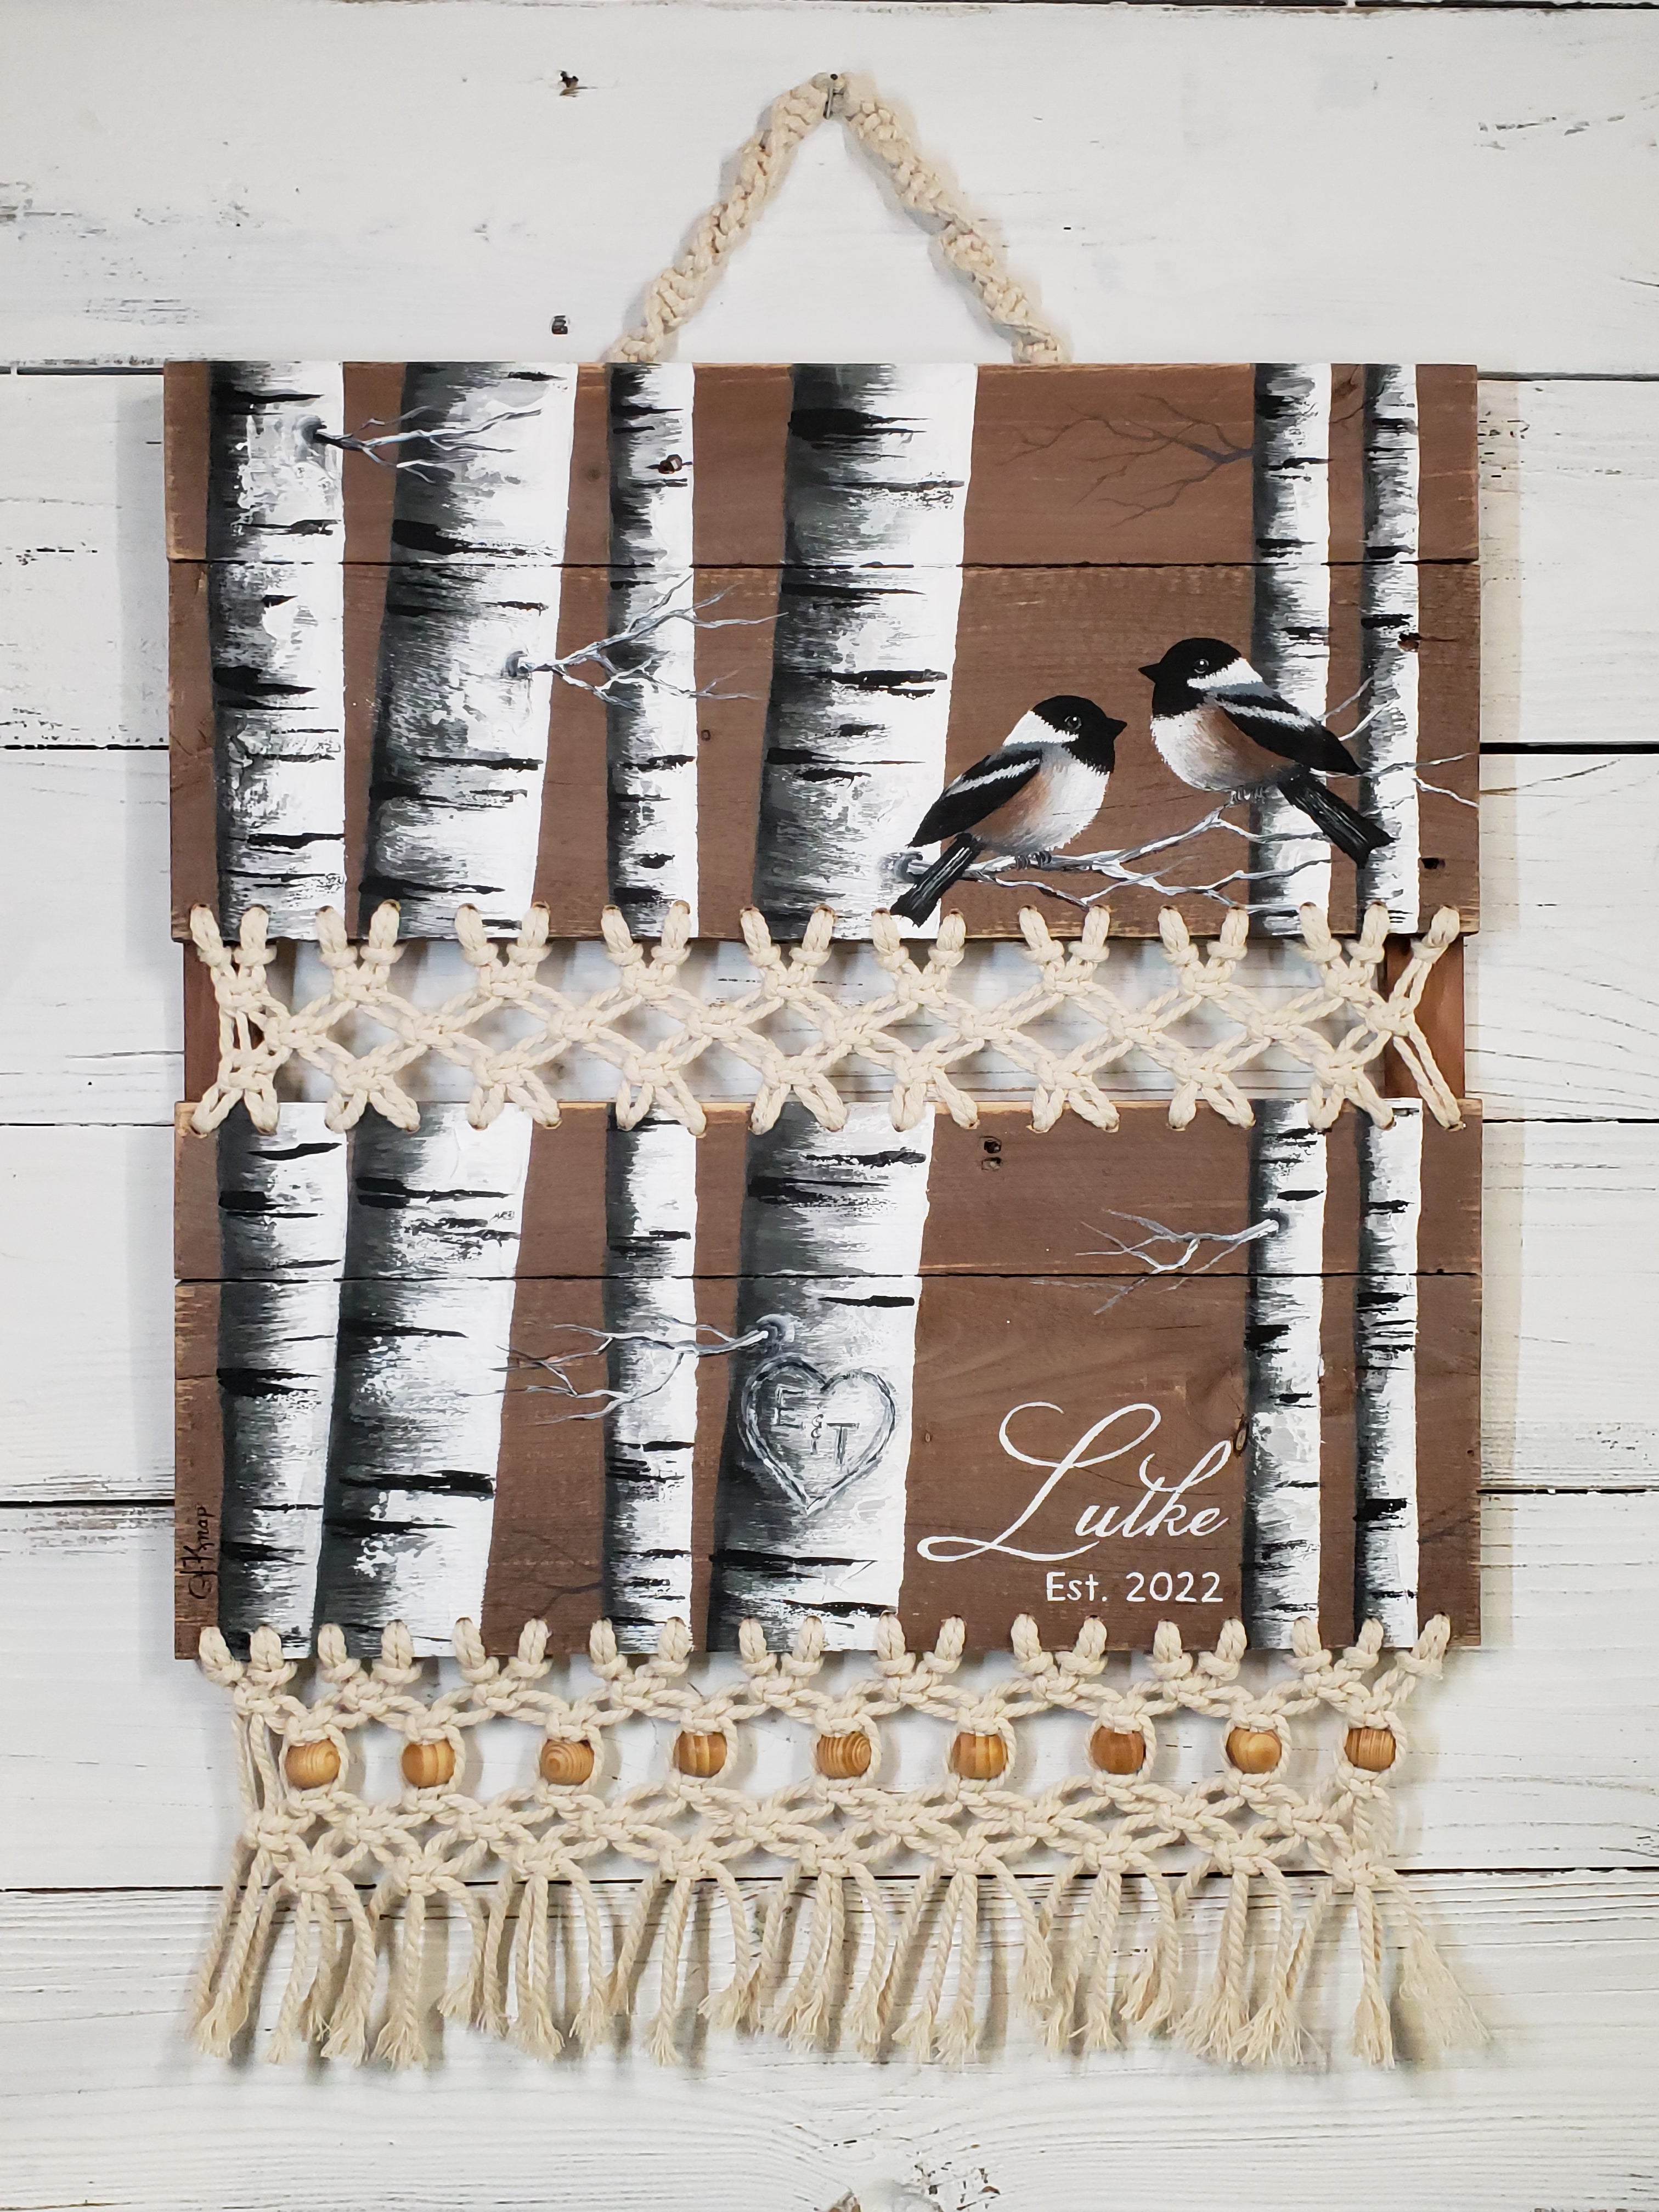 Wedding gift White Birch sweetheart sign, Gray BOHO macrame wall hanging, carved heart in tree, hand painted love bird chickadees